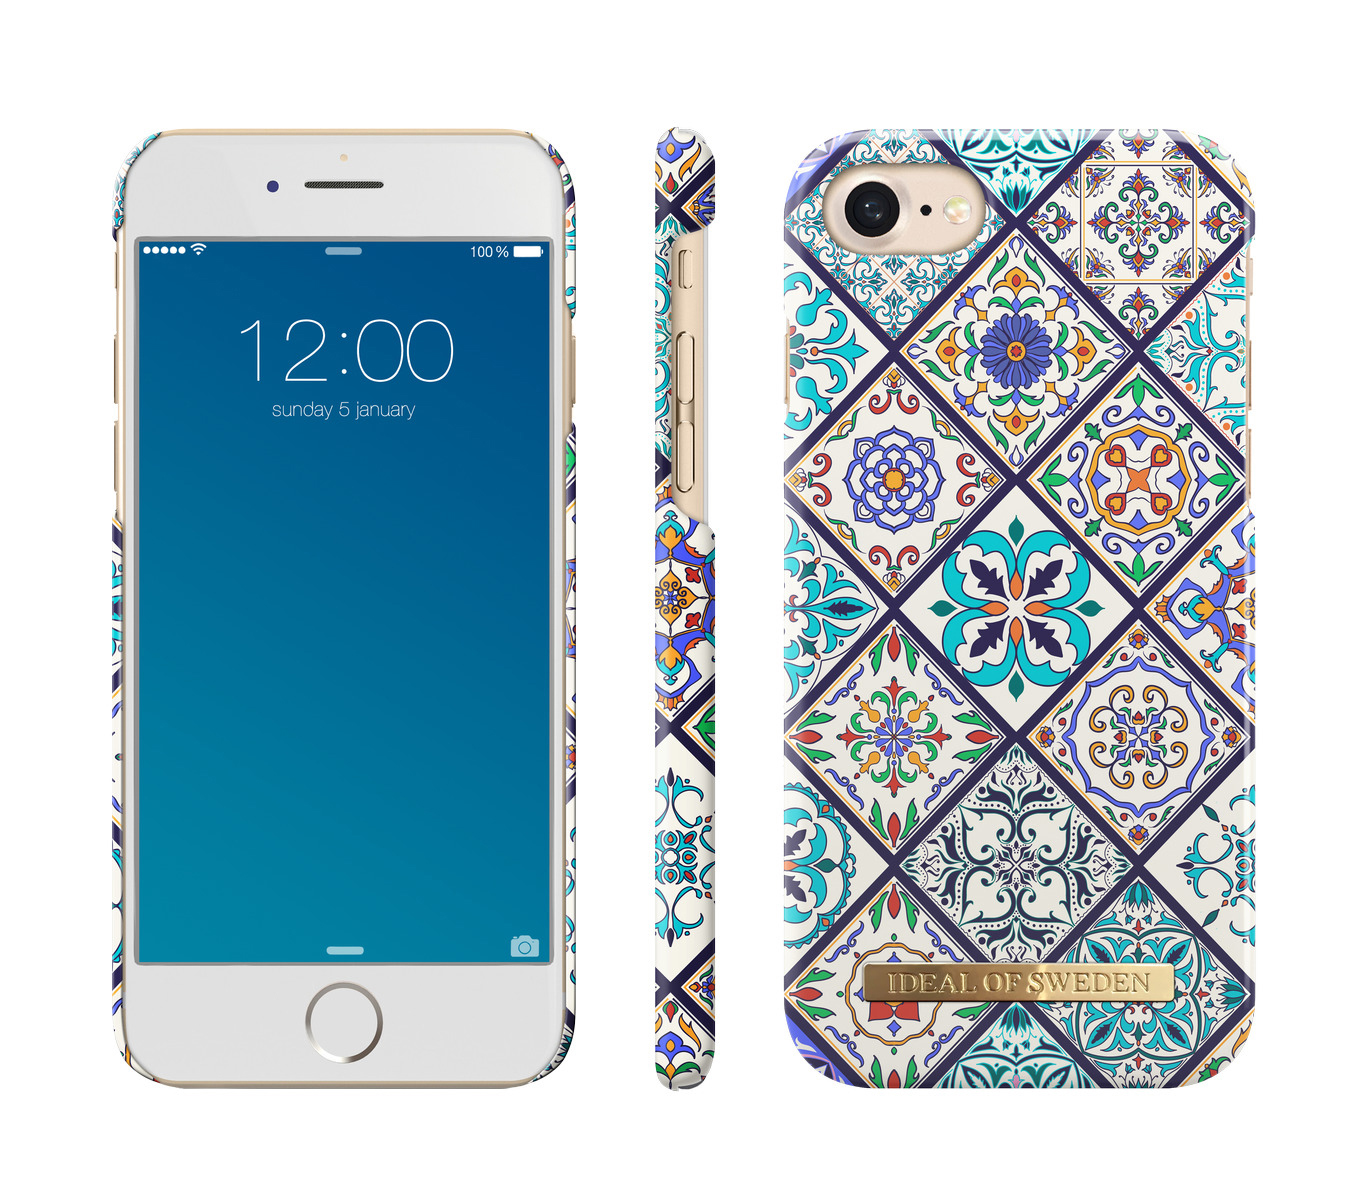 Fashion, Mosaic Backcover, iPhone IDEAL iPhone 8, iPhone 7, OF Apple, 6, SWEDEN